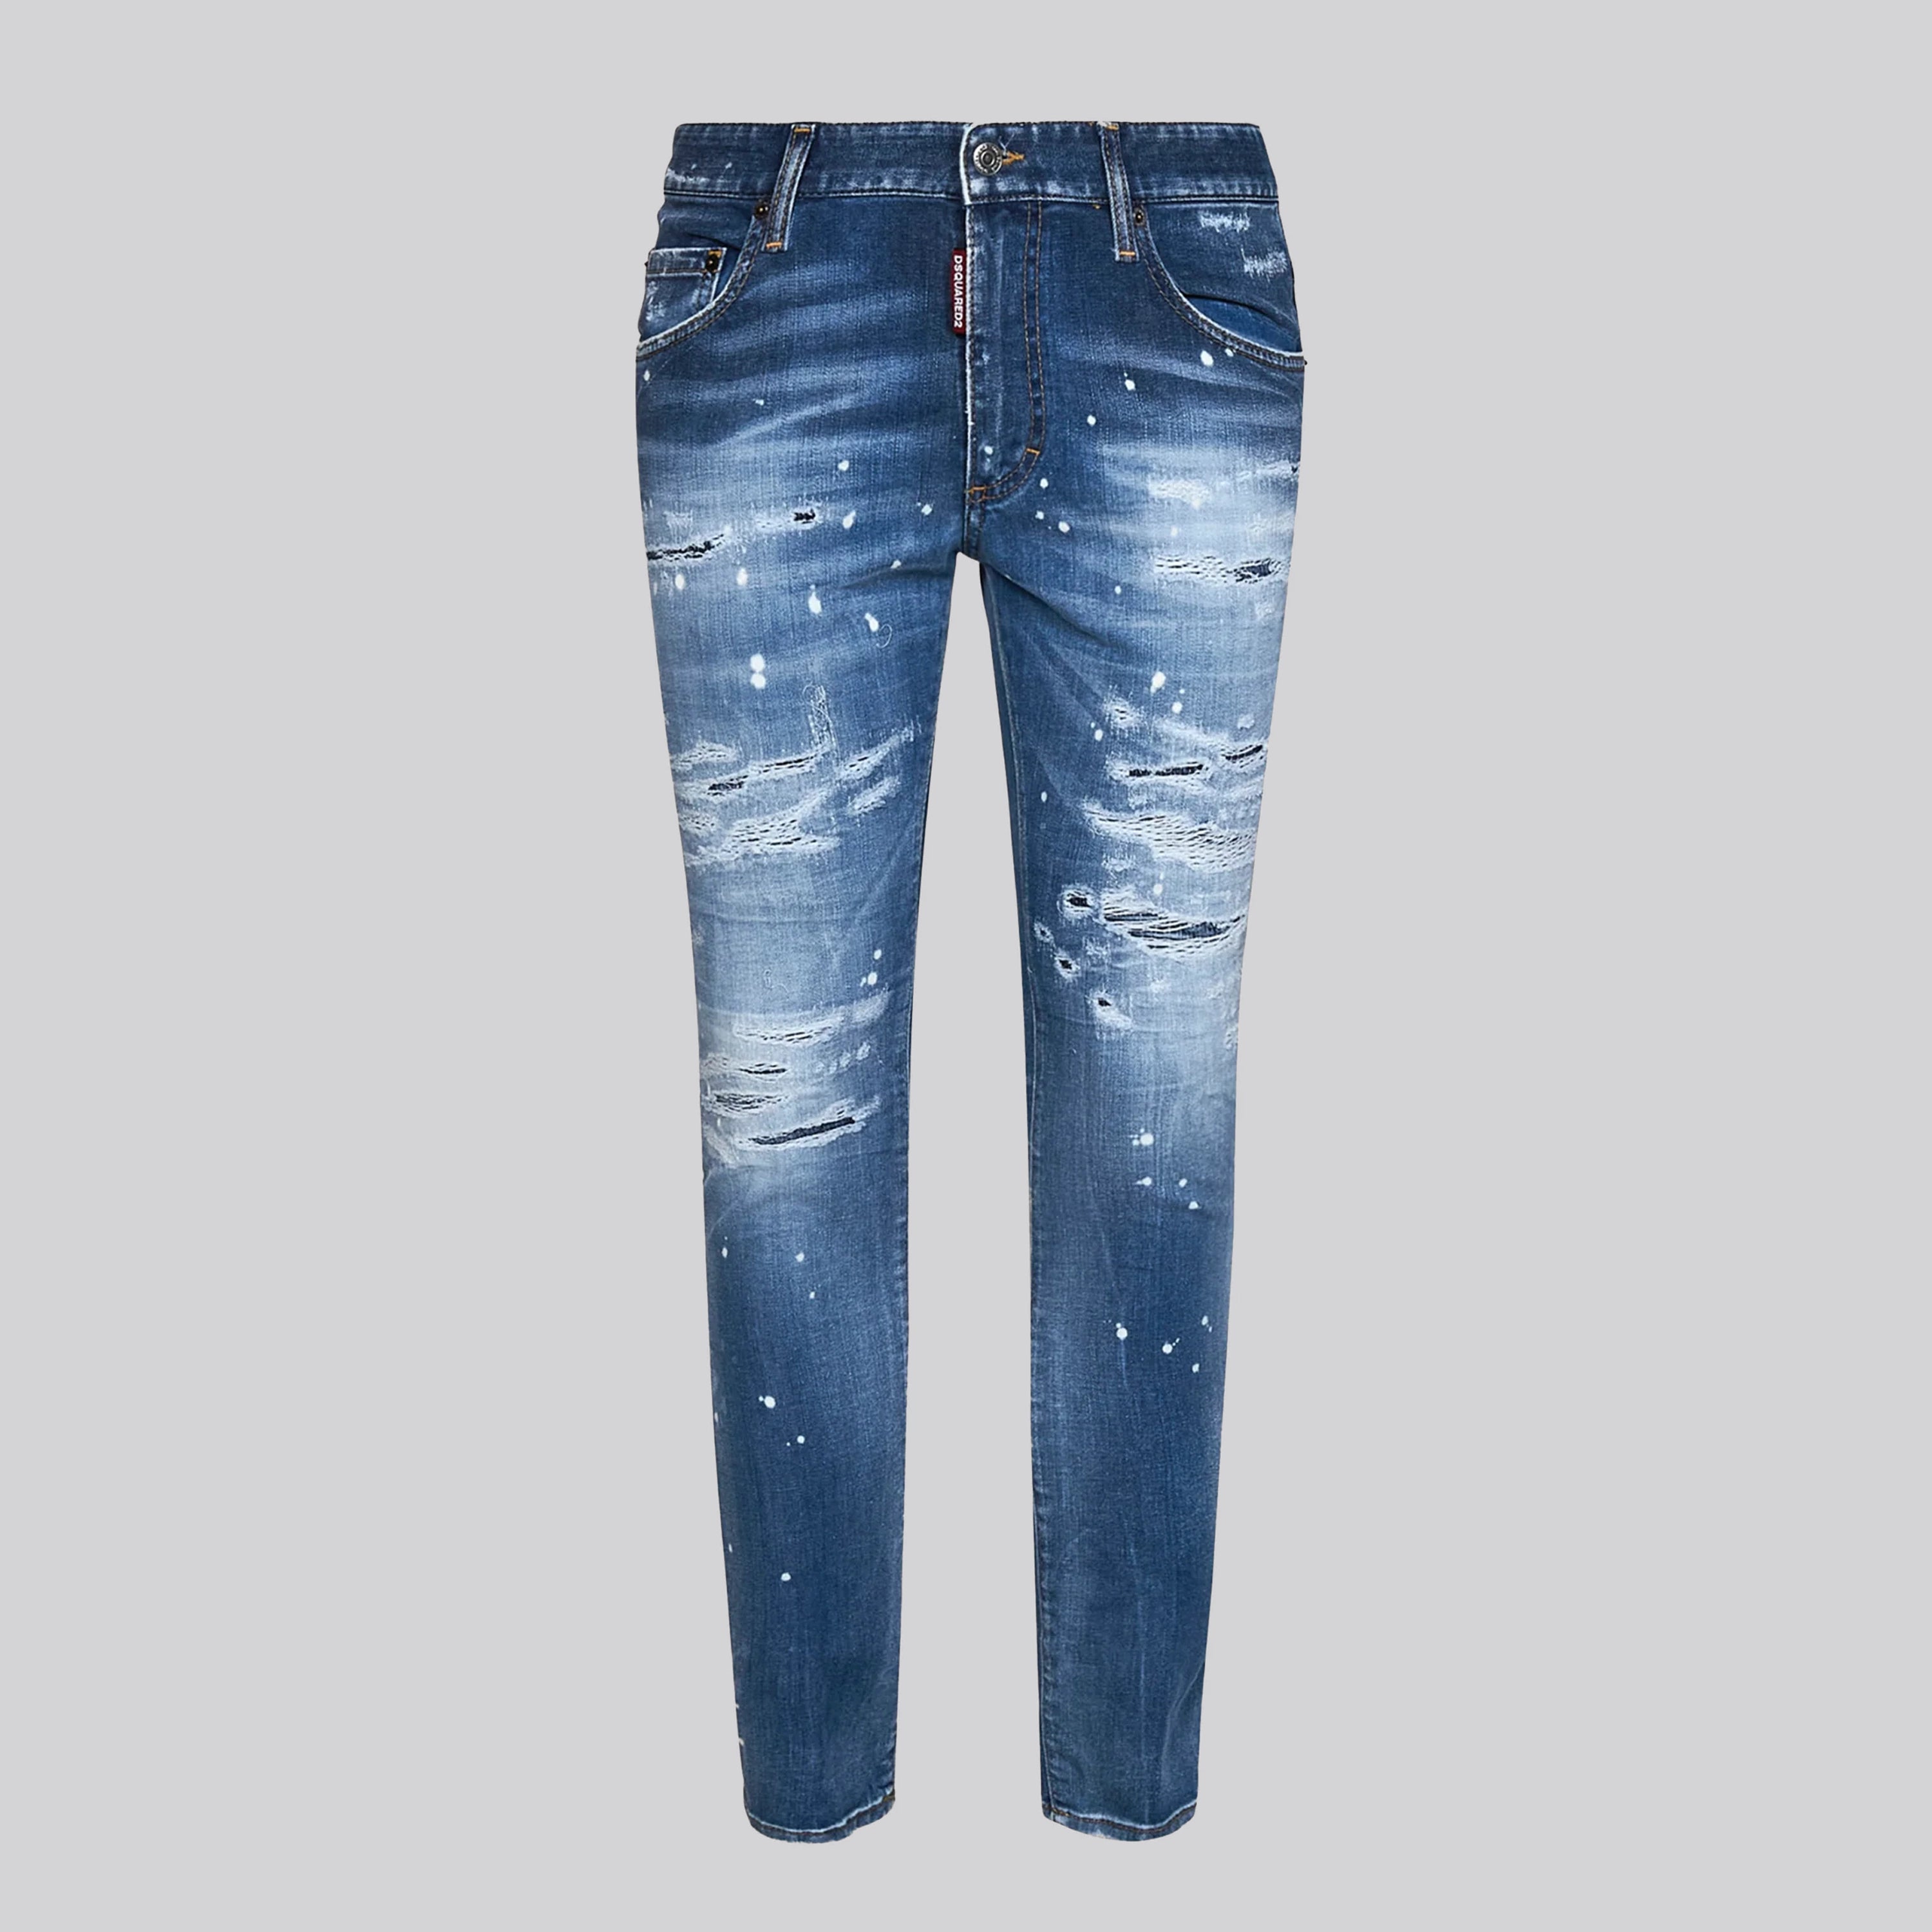 Jeans Denim Dsquared2 Super Twinky Ripped